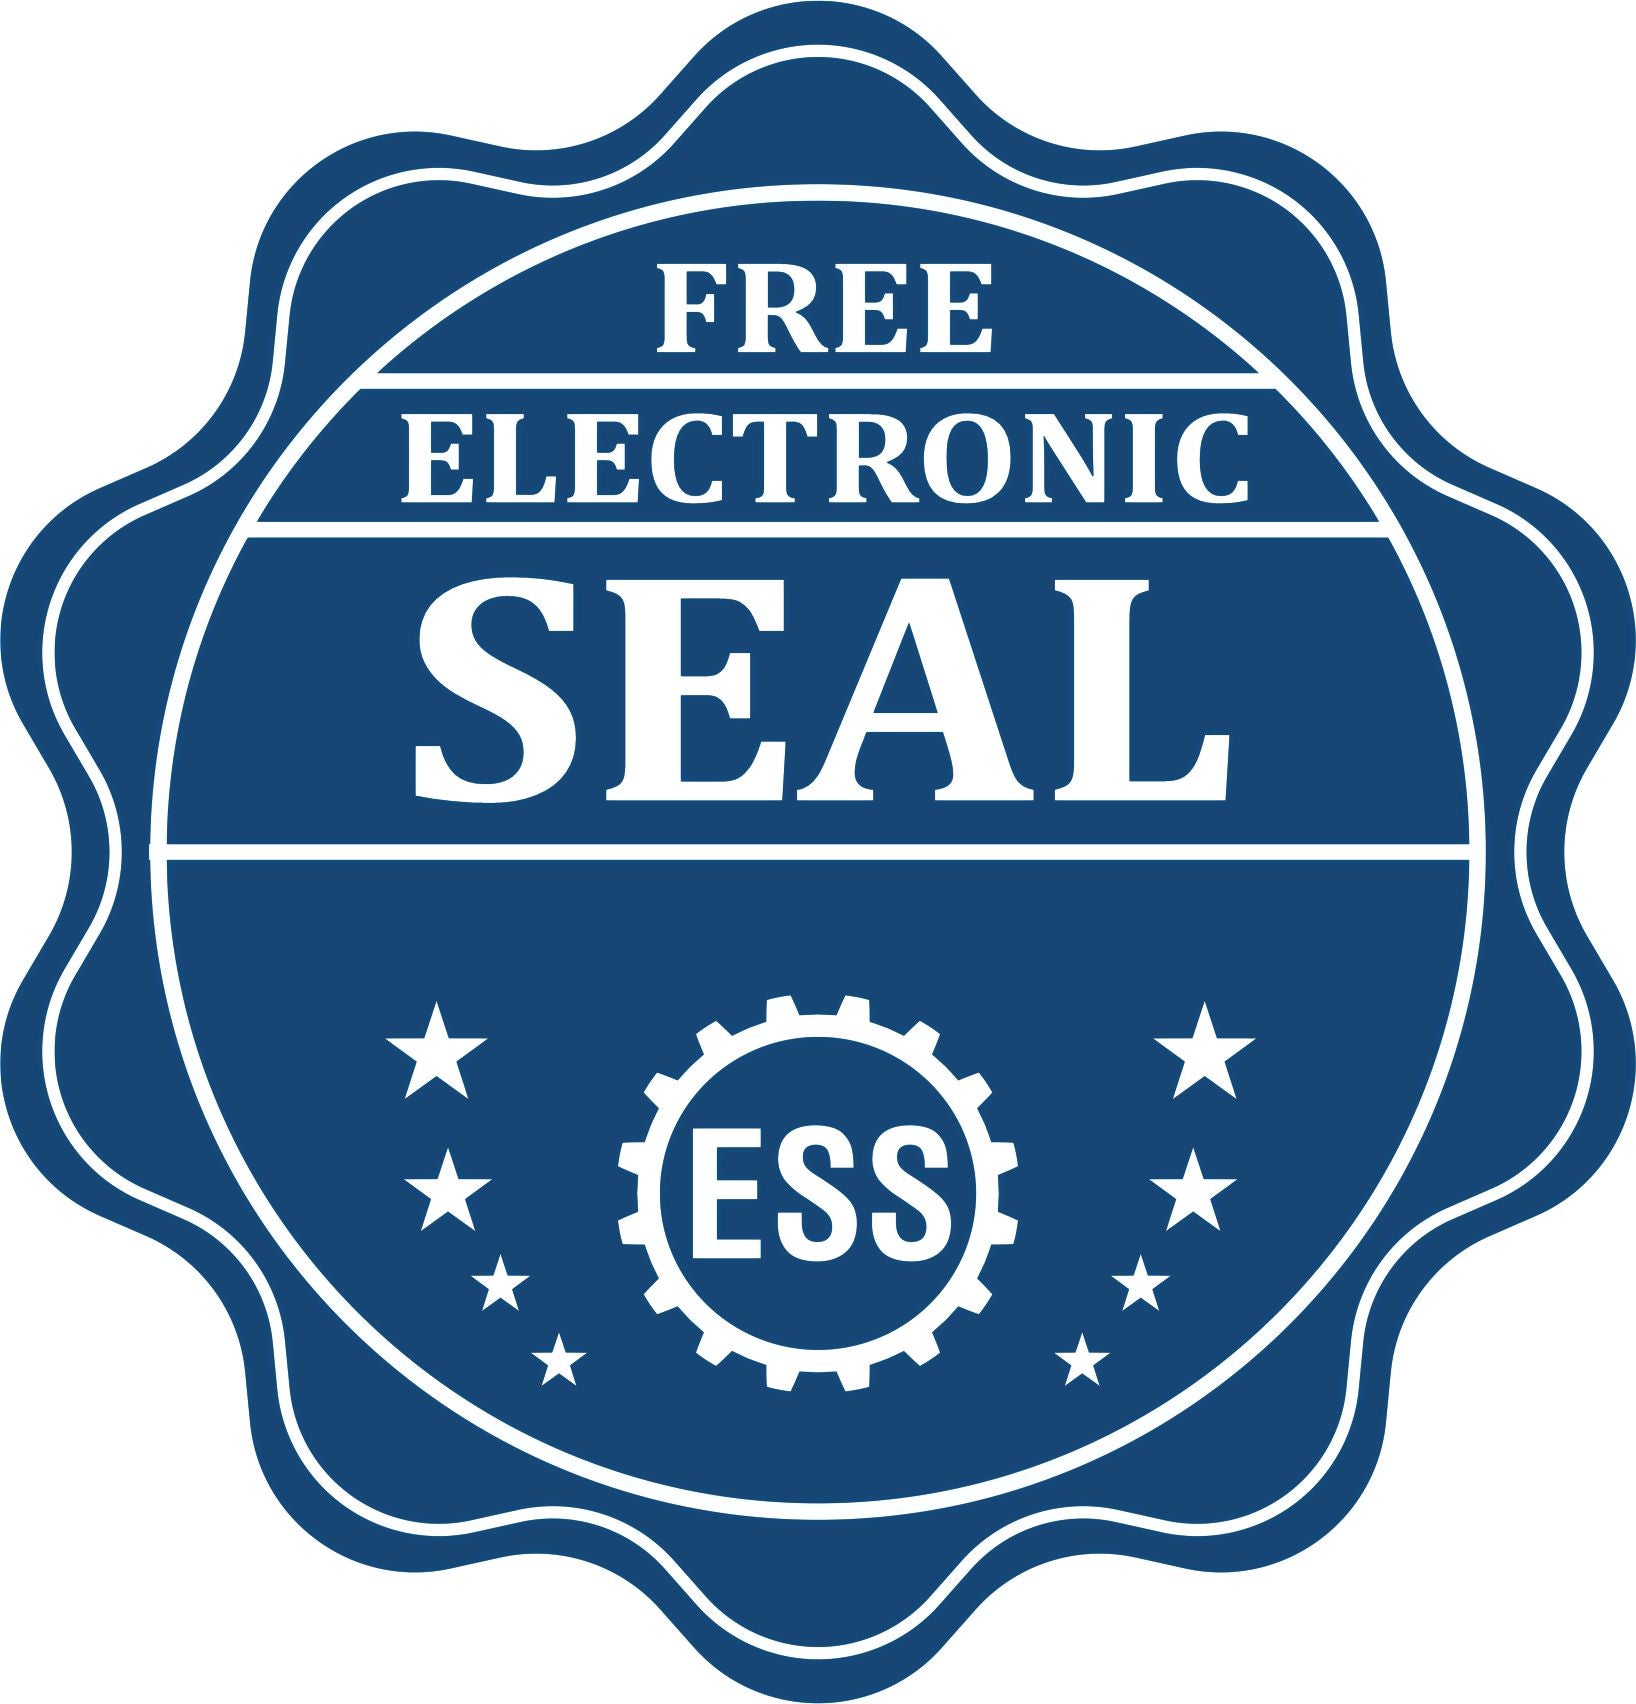 A badge showing a free electronic seal for the Long Reach Arkansas PE Seal with stars and the ESS gear on the emblem.